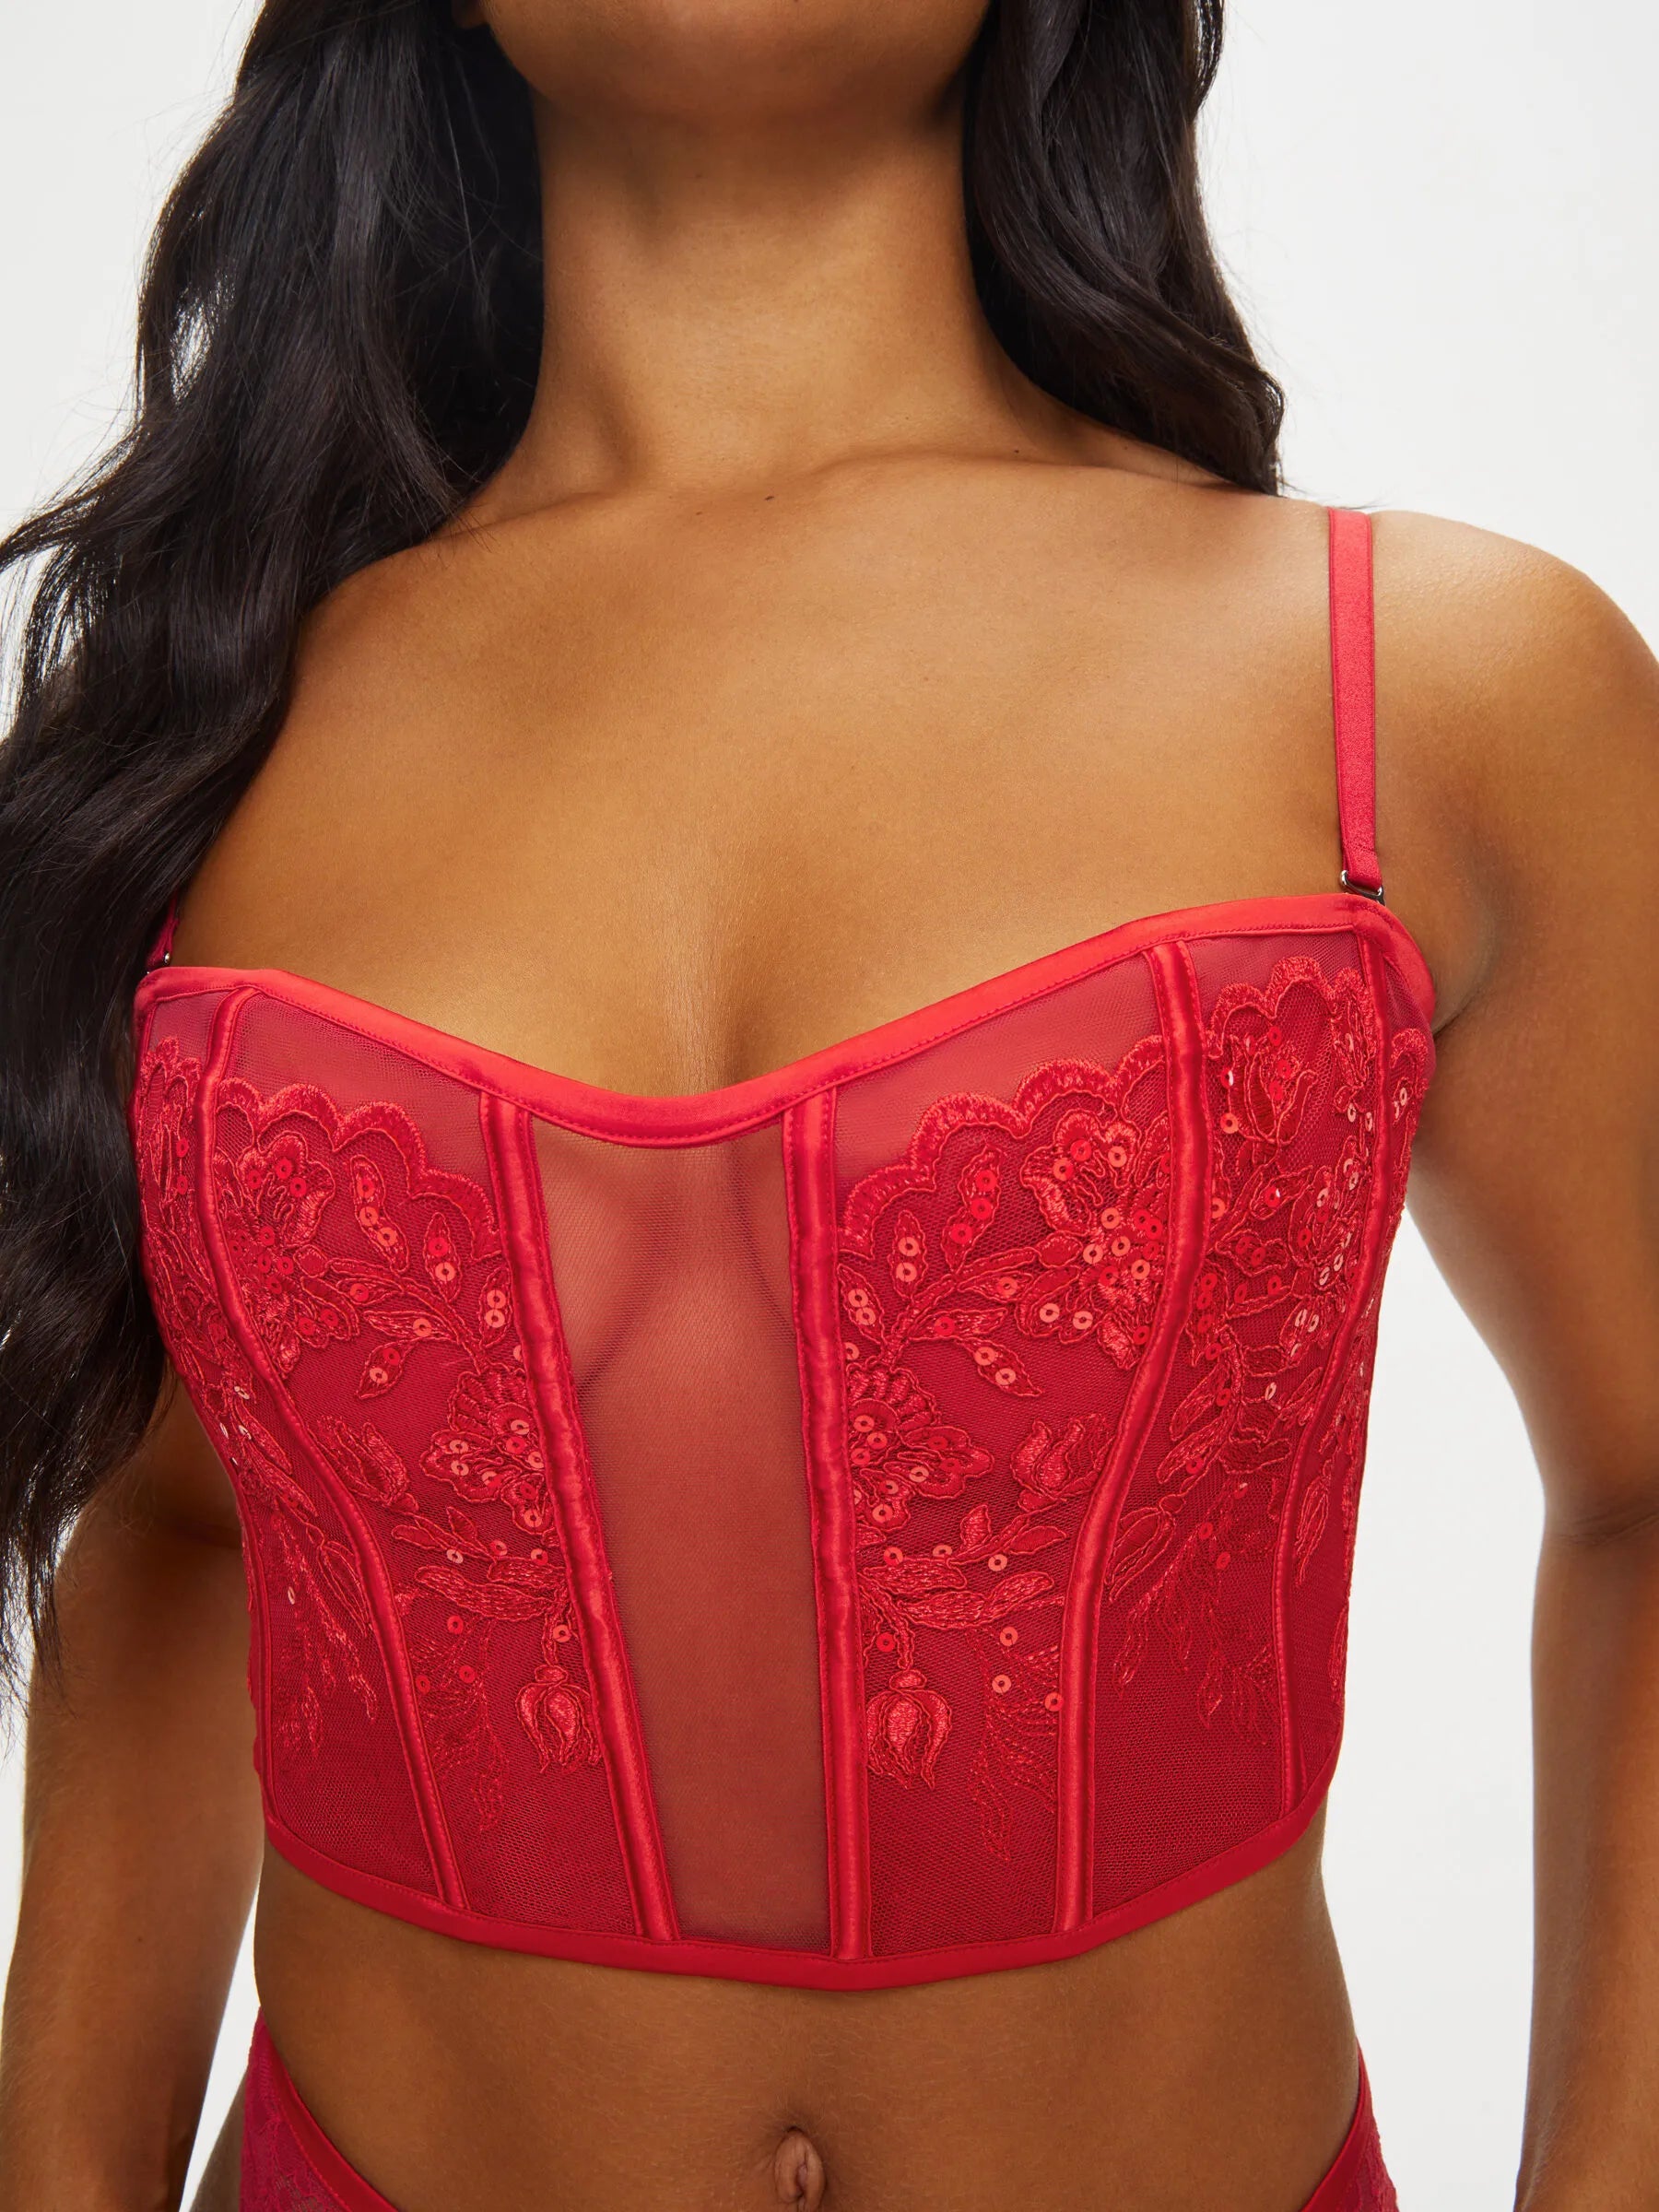 Icon Corset Bustier from Ann Summers, Image 08